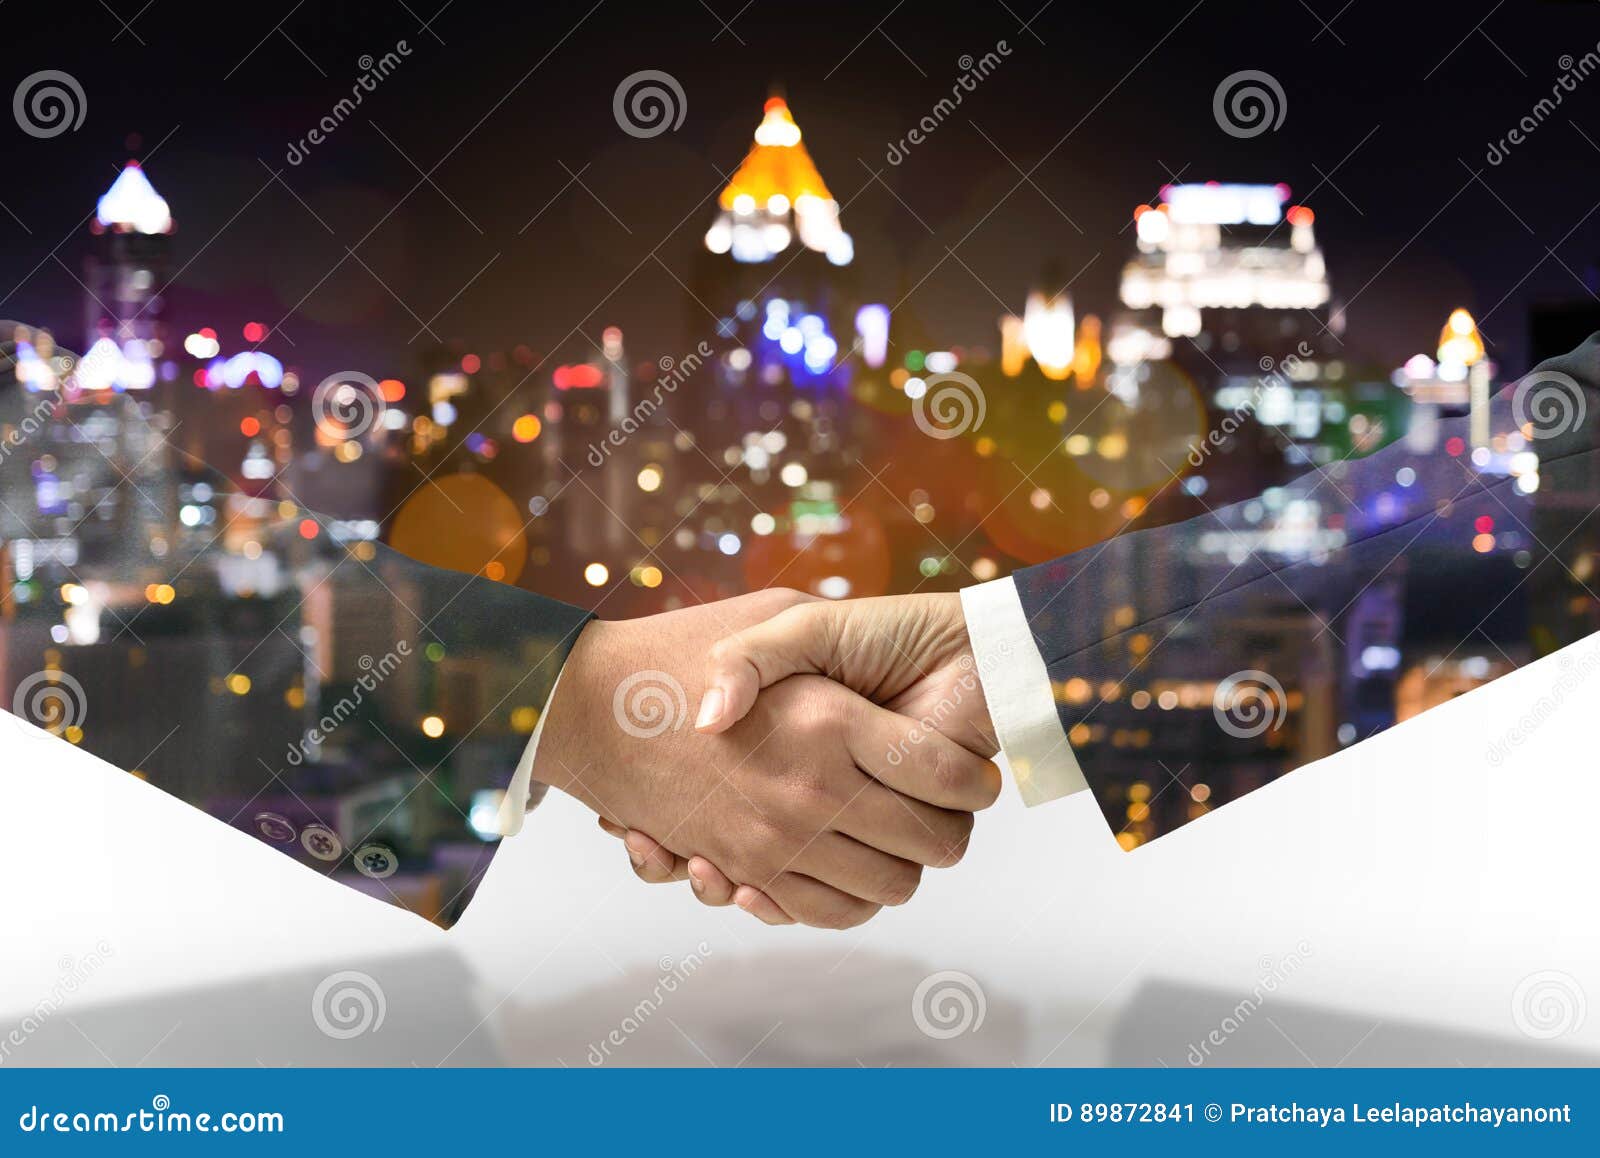 Hand Shakers in City, Social Network Stock Image - Image of data, interaction: 150583343